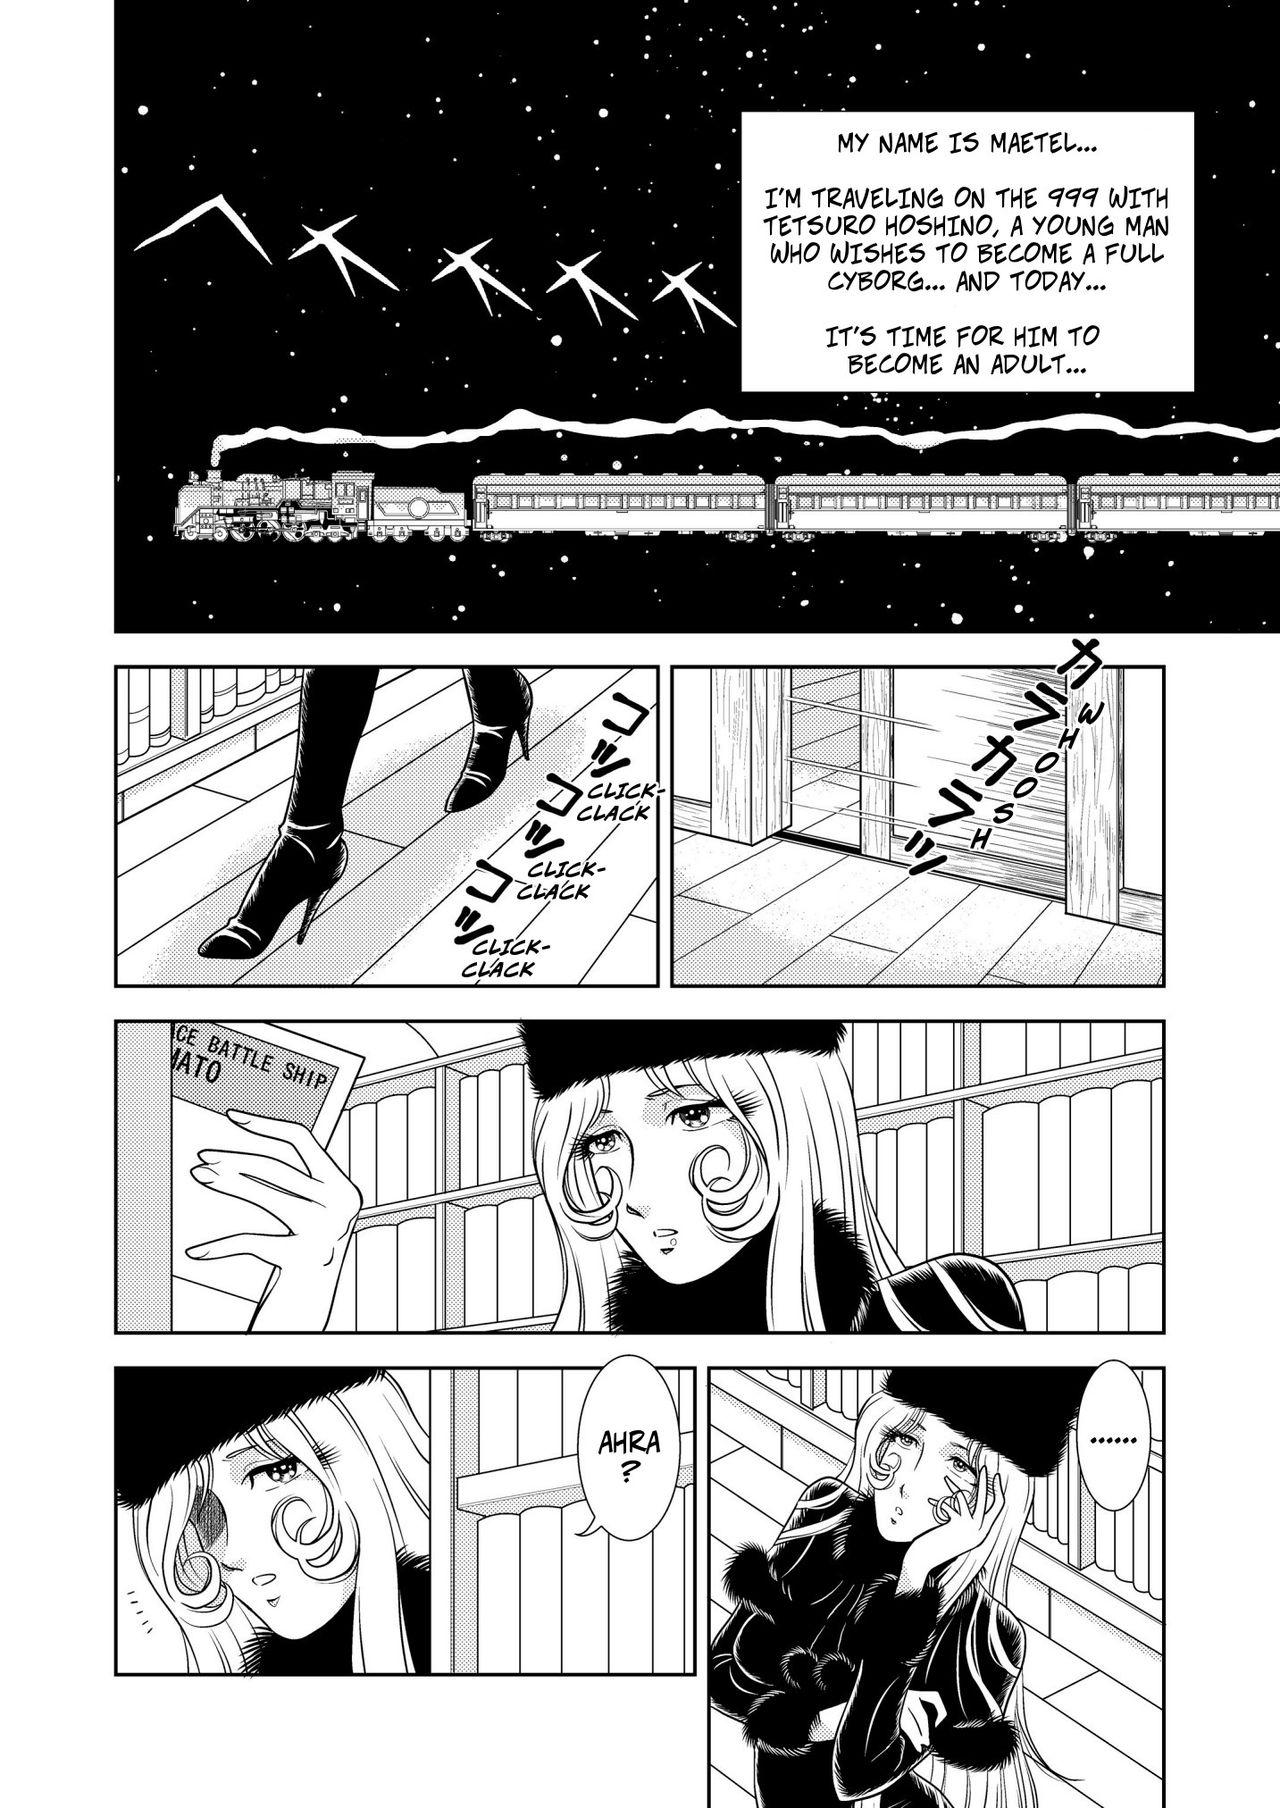 Threesome Maetel Story 2 - Galaxy express 999 Asstomouth - Page 2